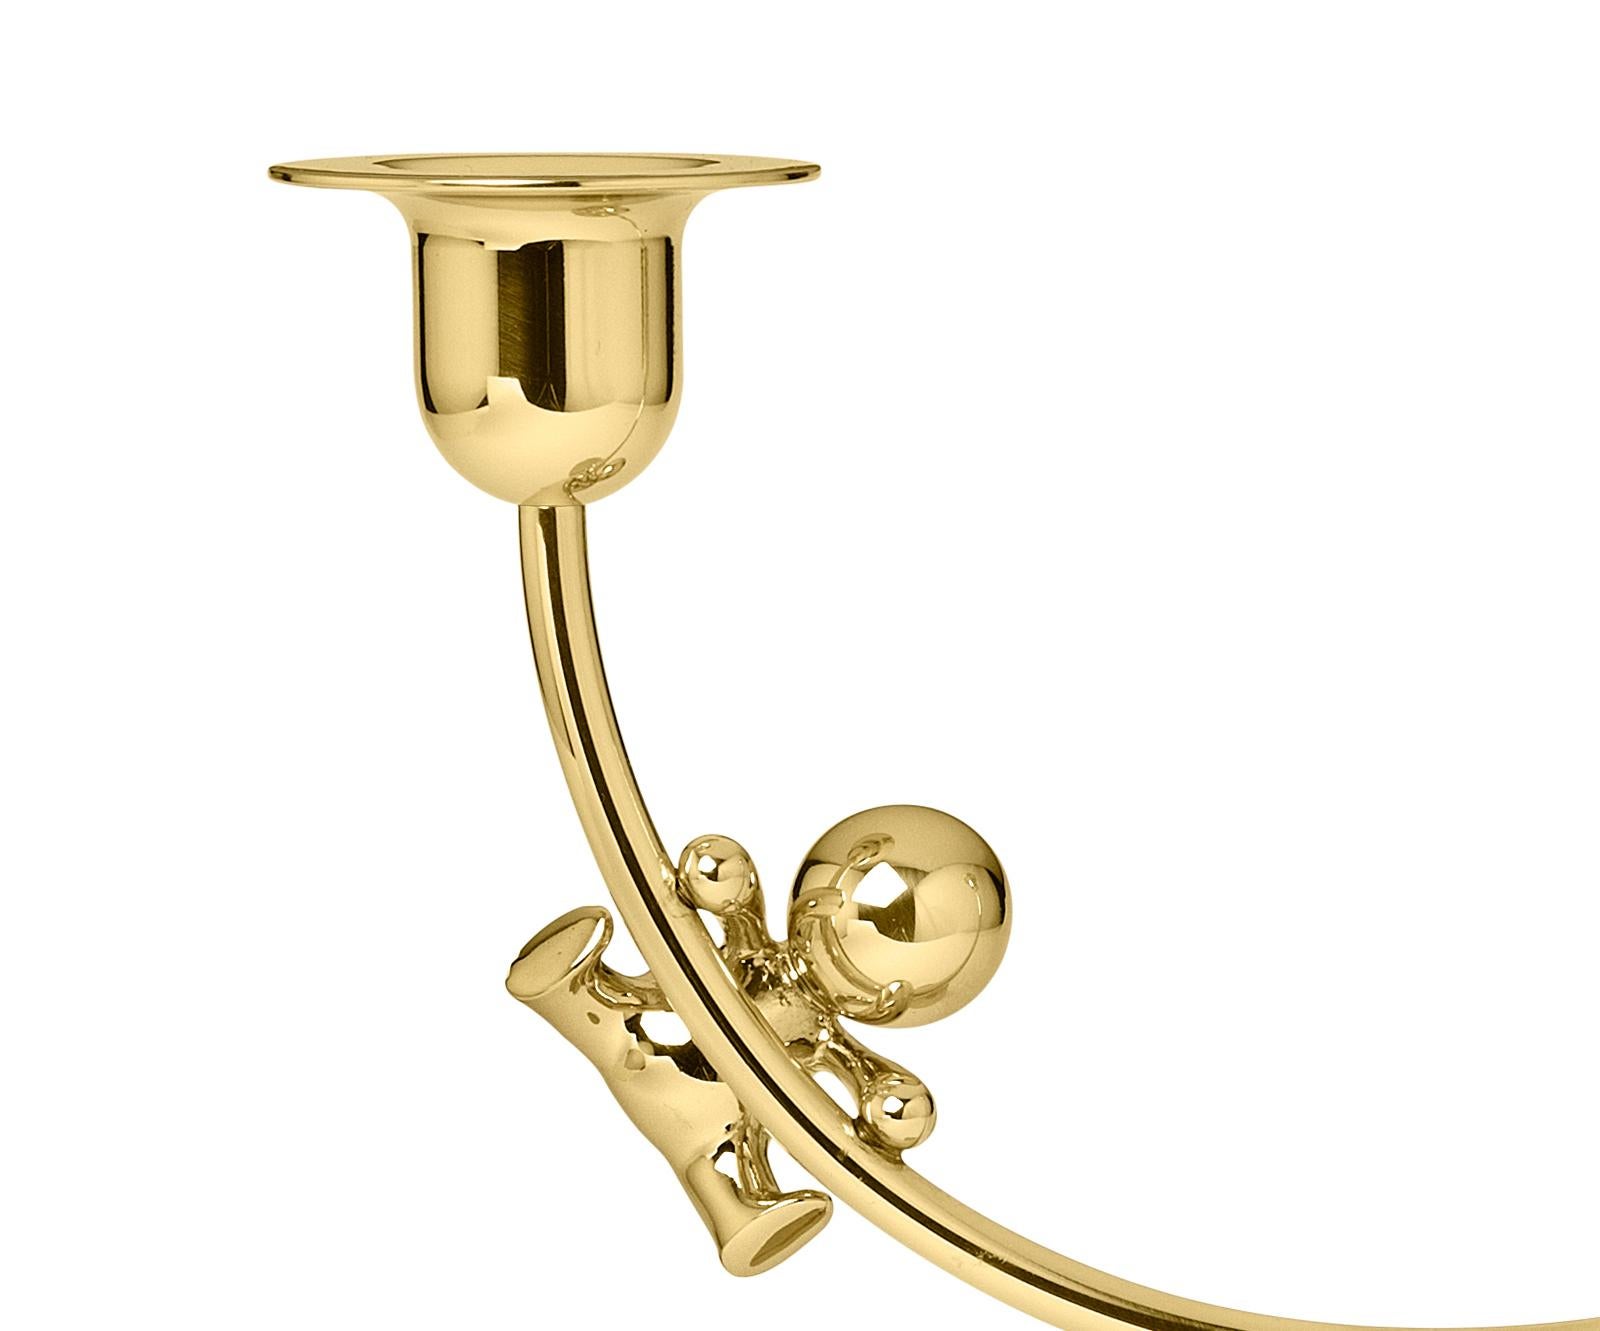 Modern Ghidini 1961 Omini the Lazy Climber Candlestick in Brass by Stefano Giovannoni For Sale